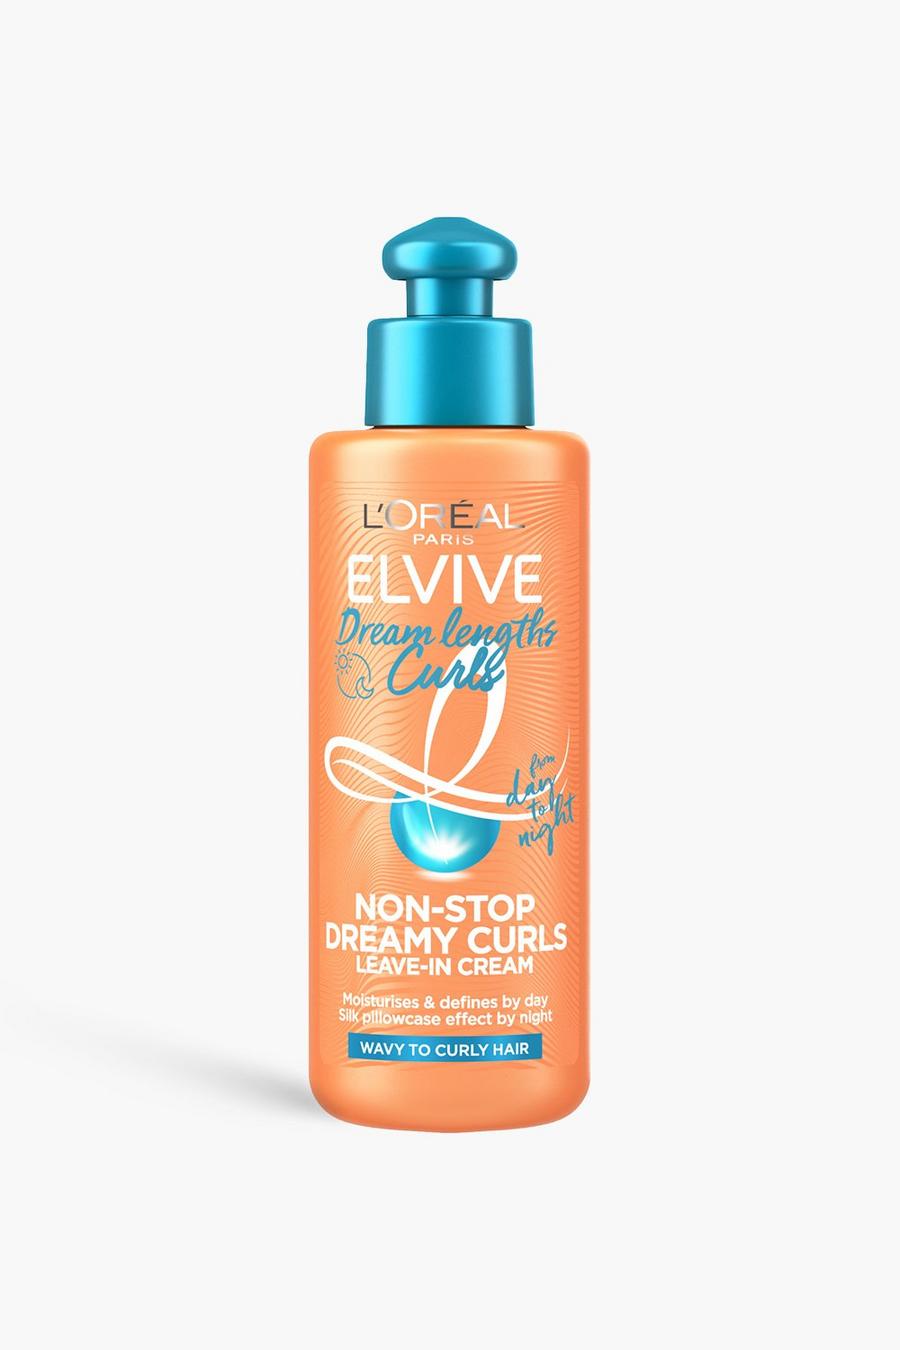 White L'Oreal Elvive Dream Lengths Curls Leave in Cream, for wavy to curly hair